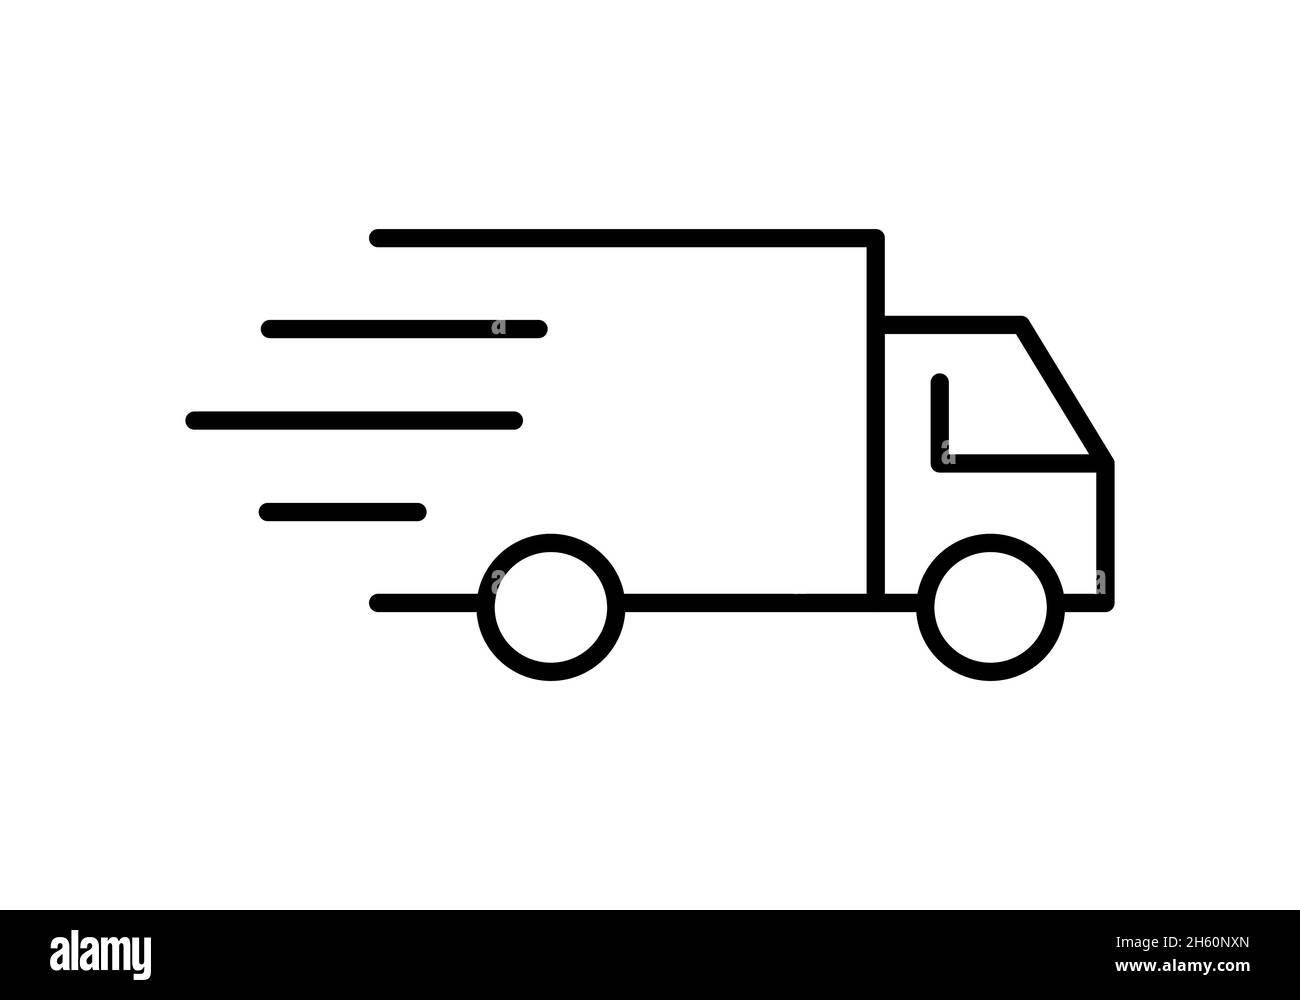 Delivery truck line icon. Cargo, distribution, transportation concept. Fast shipping idea. Moving vehicle with lines symbolizing speed. Vector, flat. Stock Vector